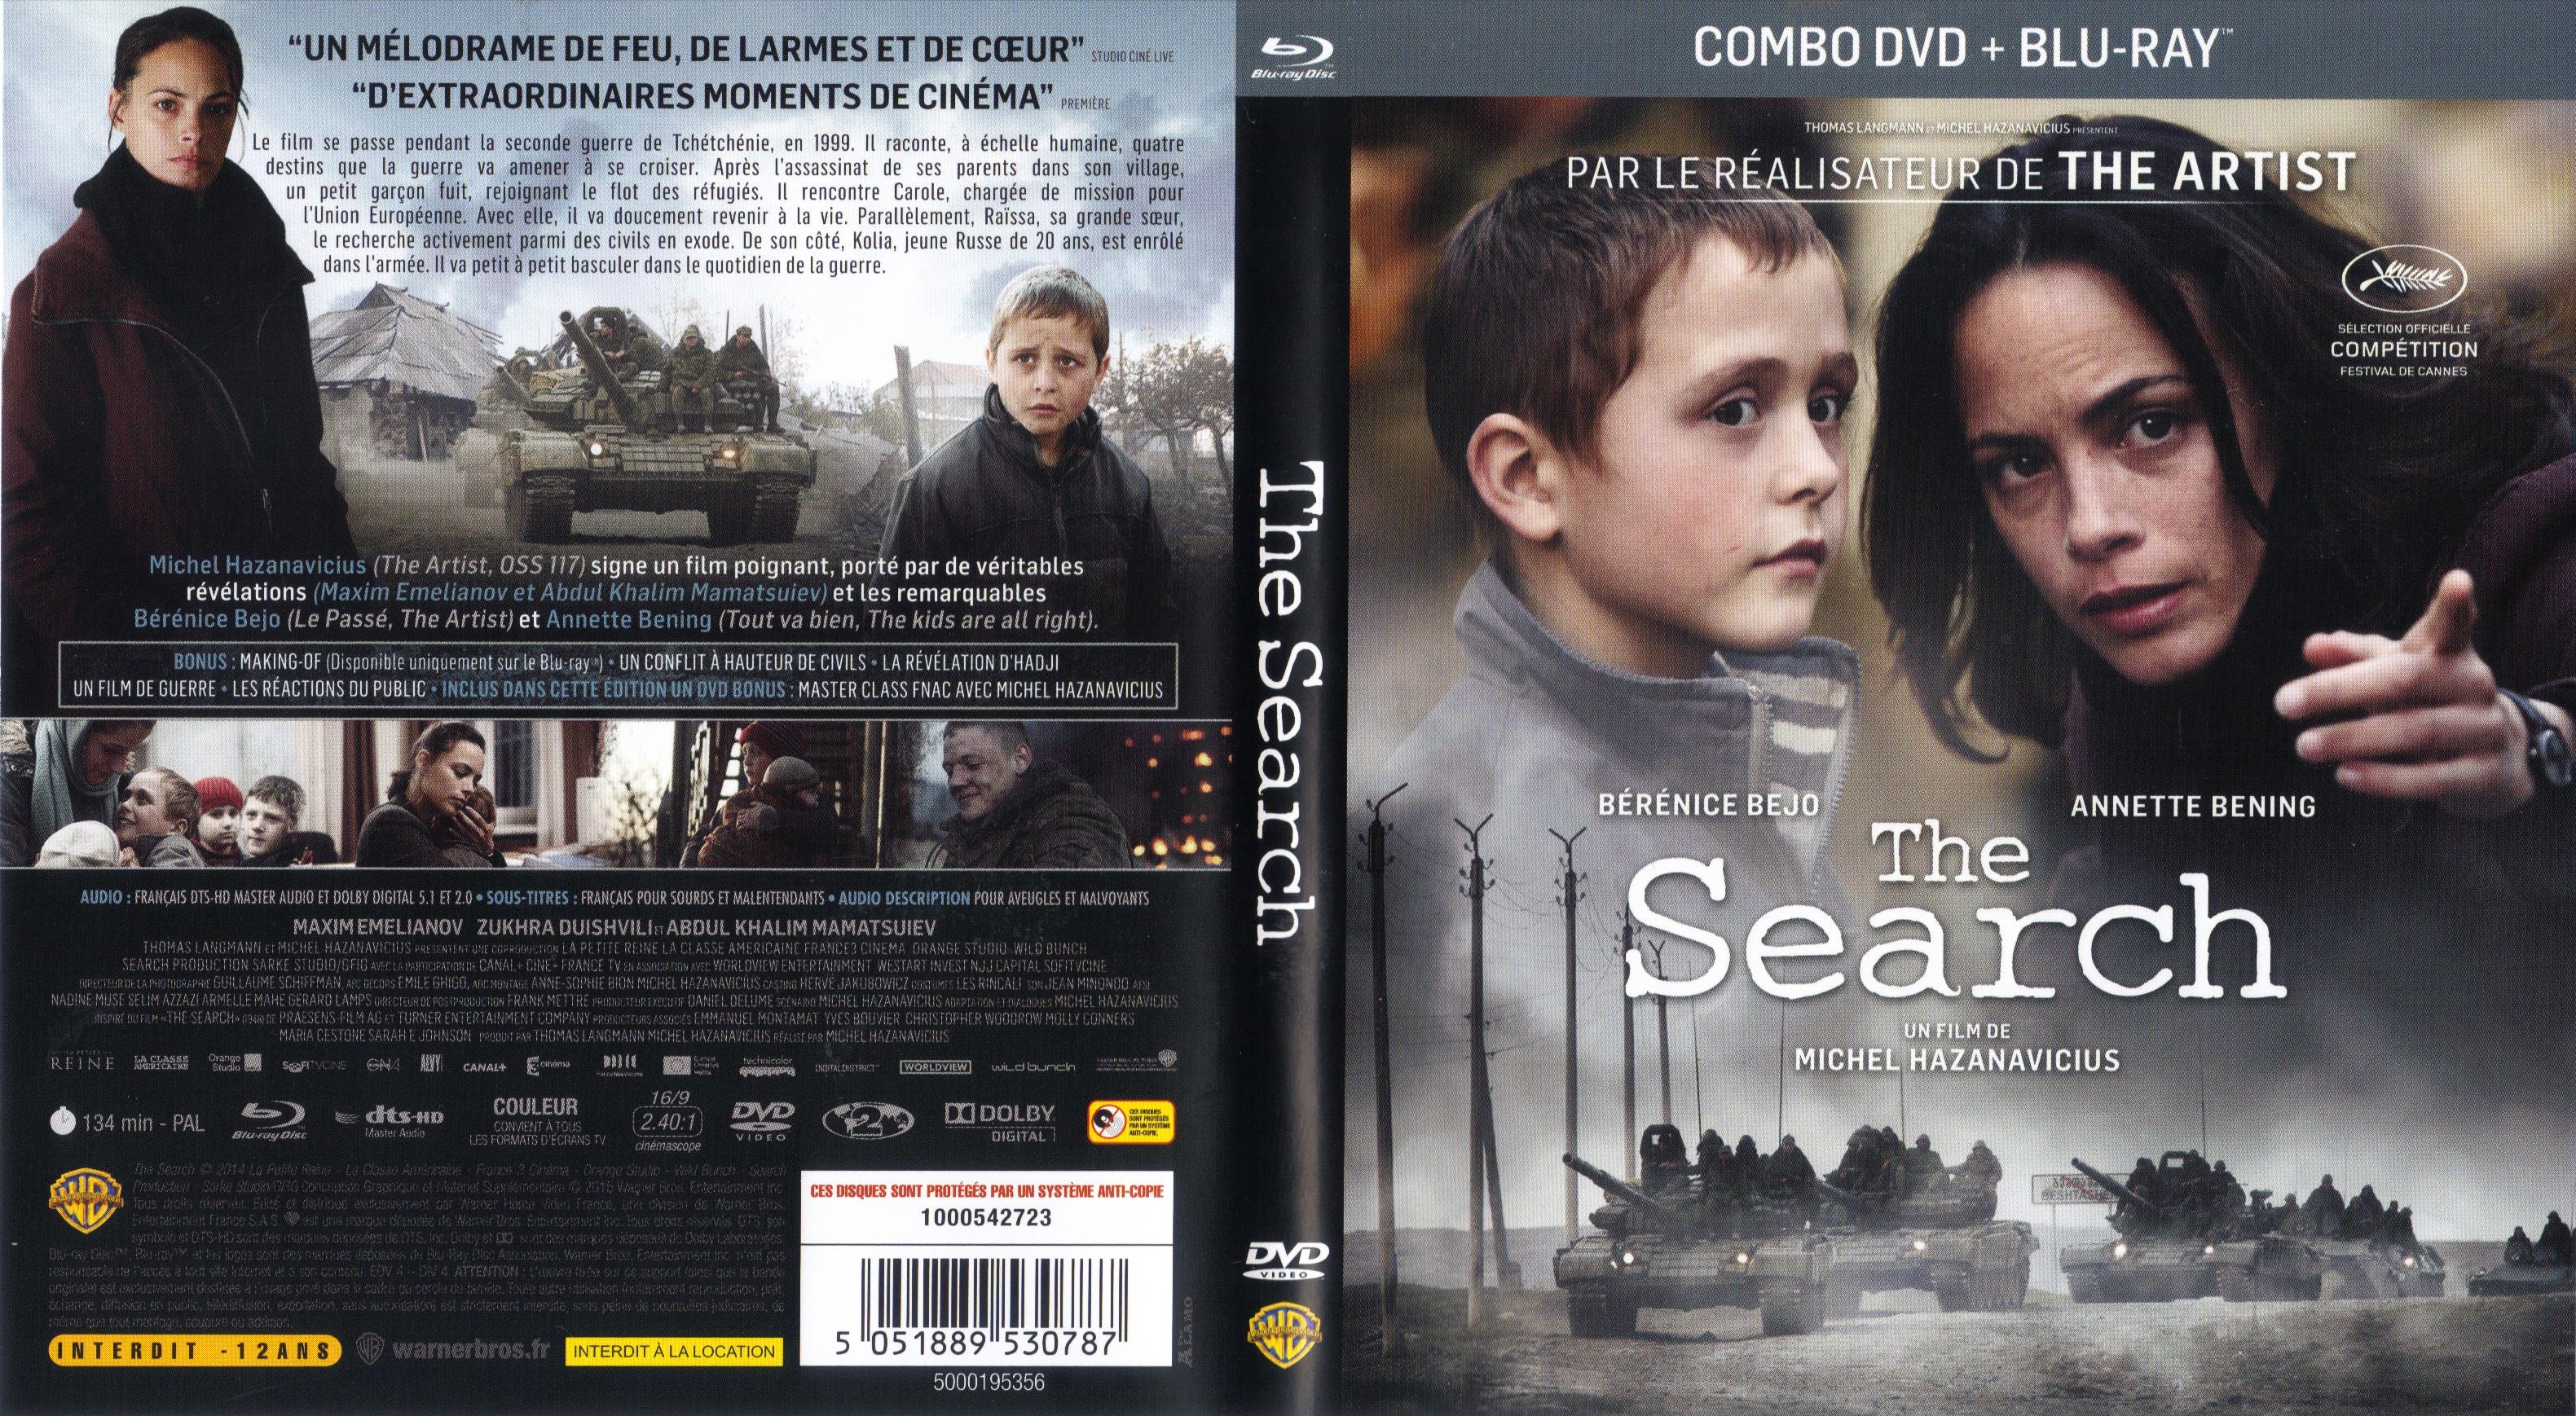 Jaquette DVD The Search (BLU-RAY)